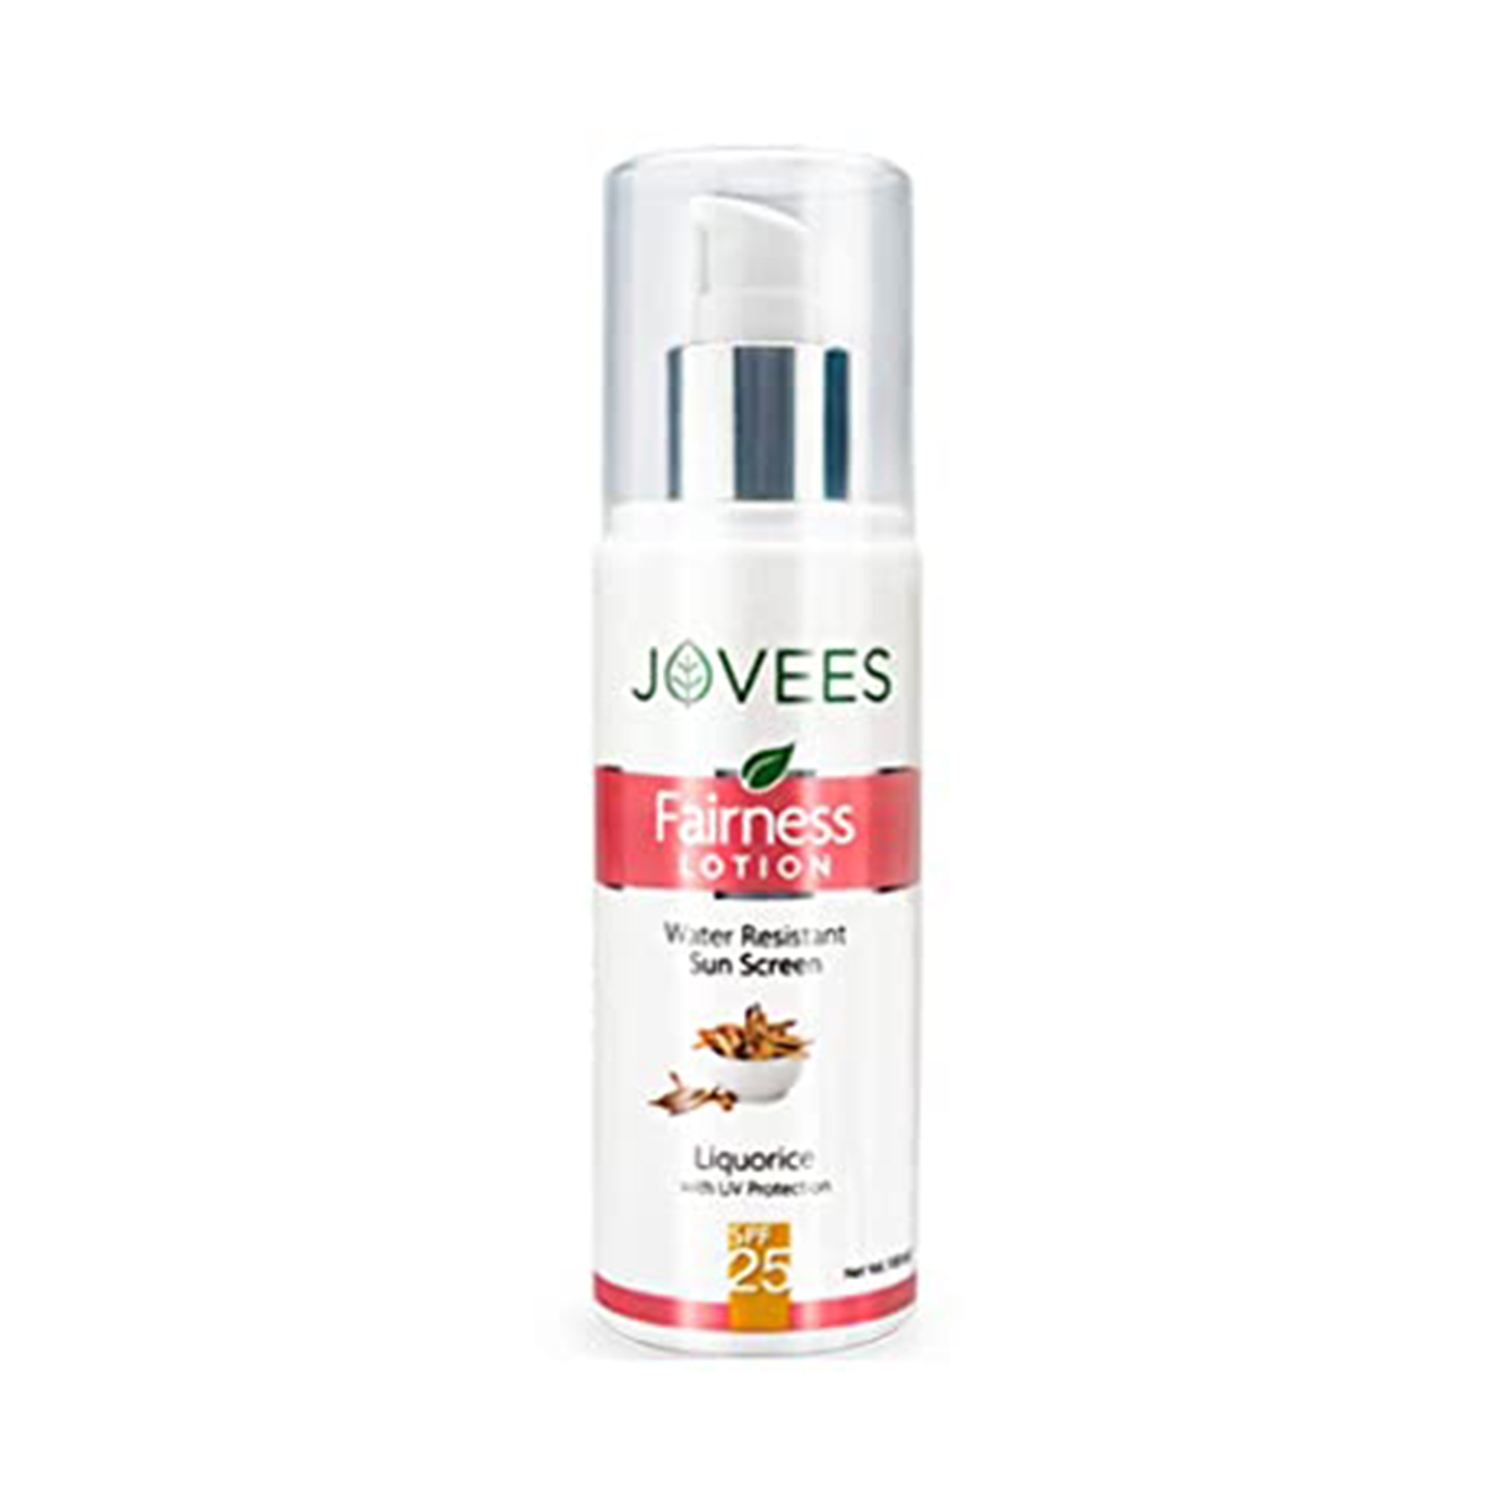 Jovees | Jovees Liquorice with UV Protection Fairness Lotion SPF 25 (100ml)